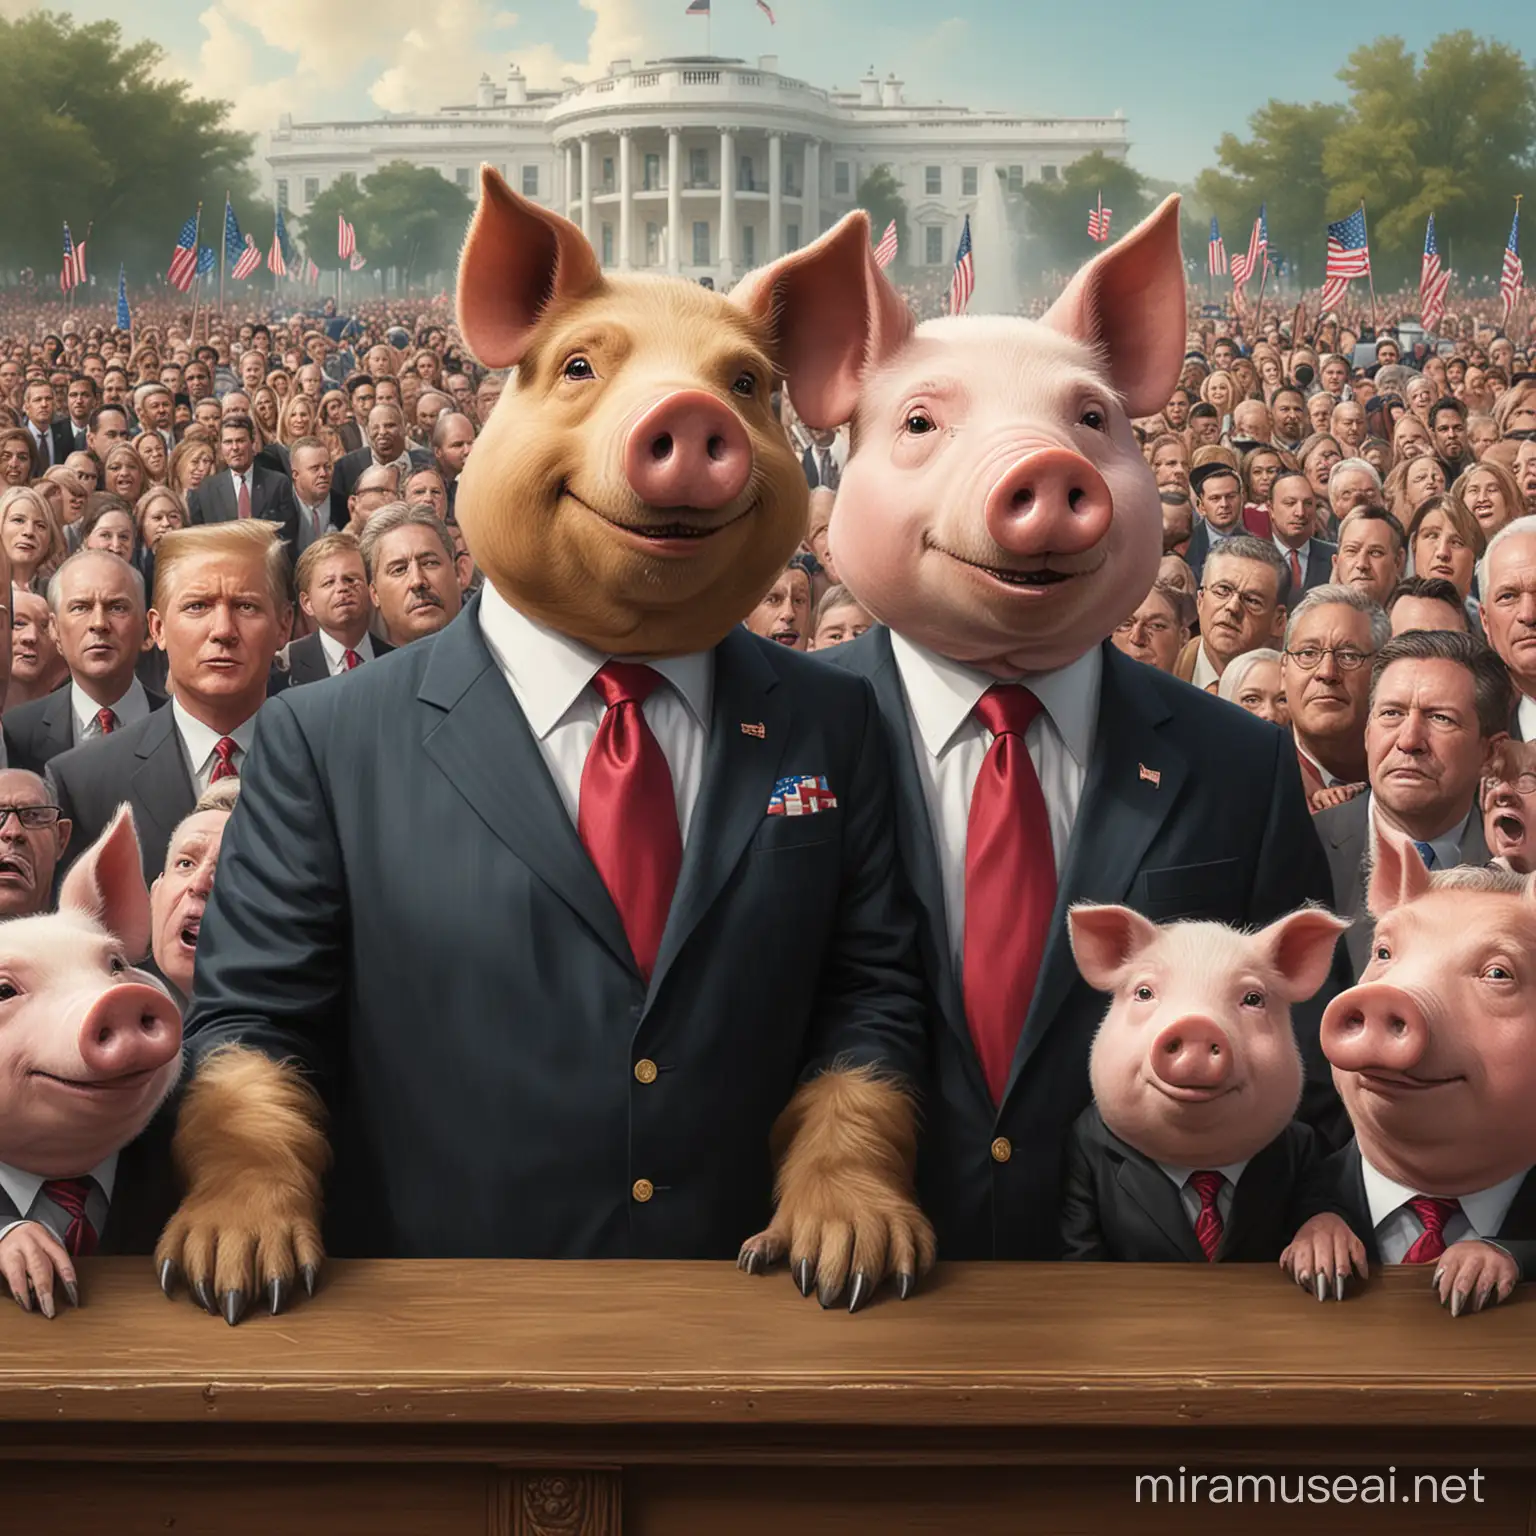 a dog-headed president and a pig-headed vice president in front of a crowd of people
